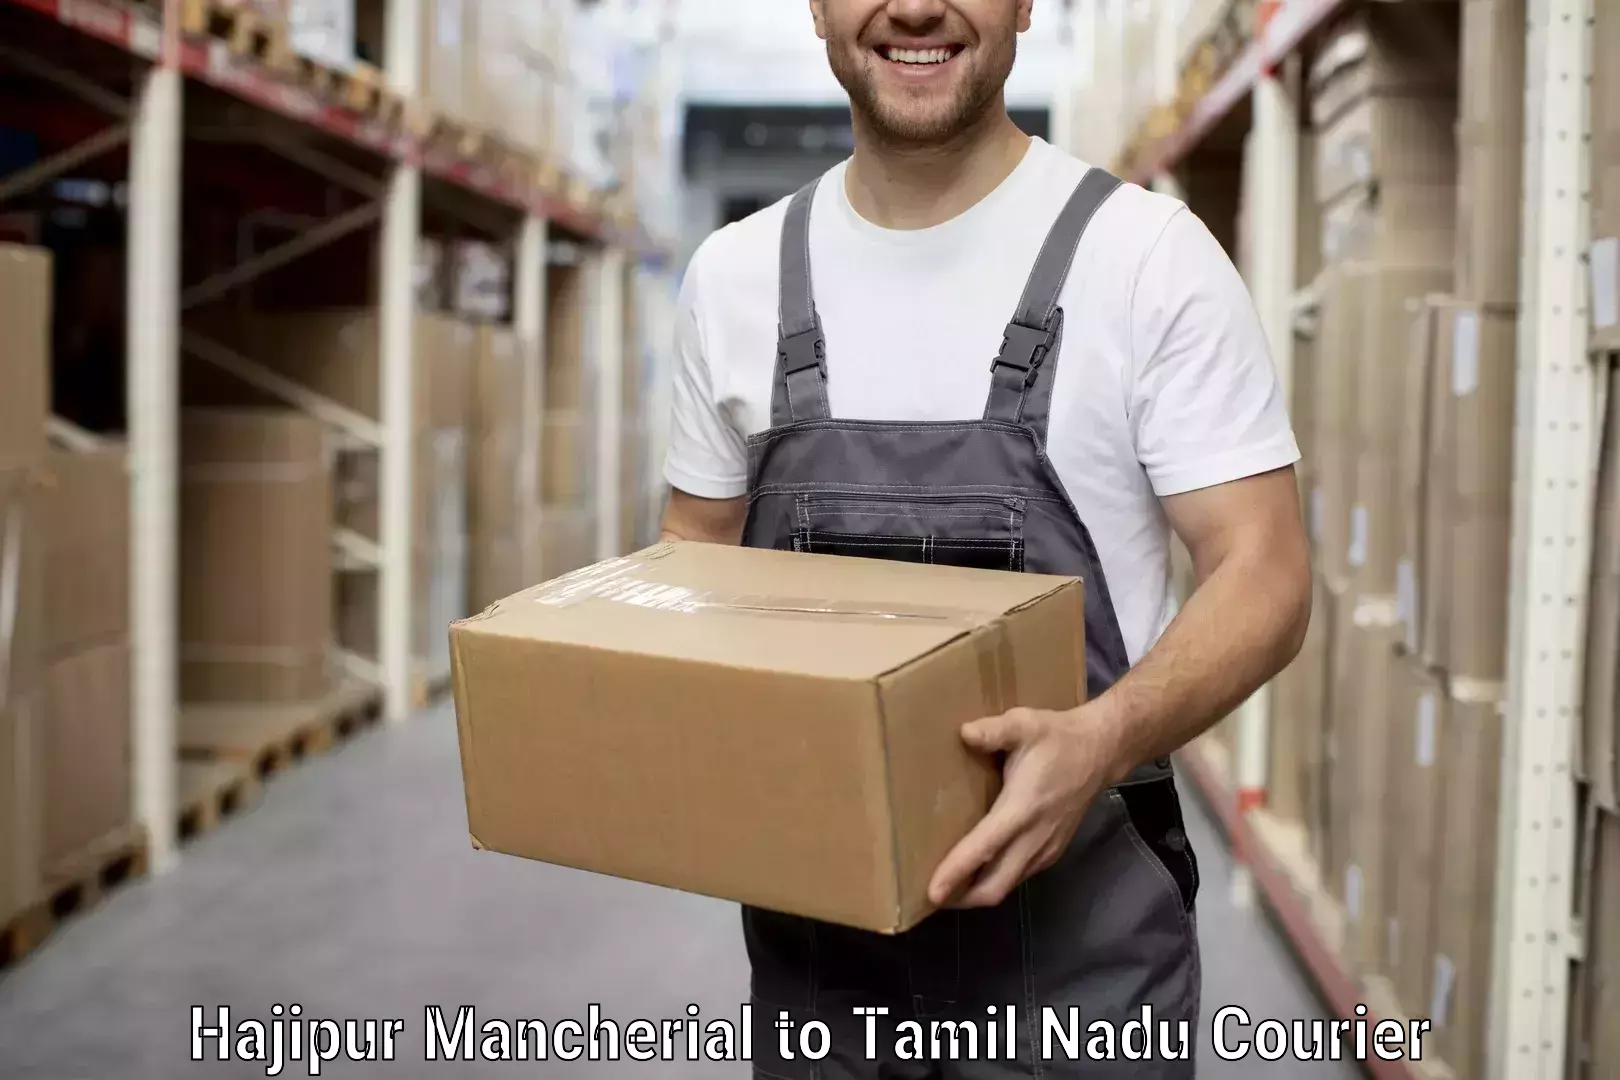 Affordable household movers Hajipur Mancherial to Trichy